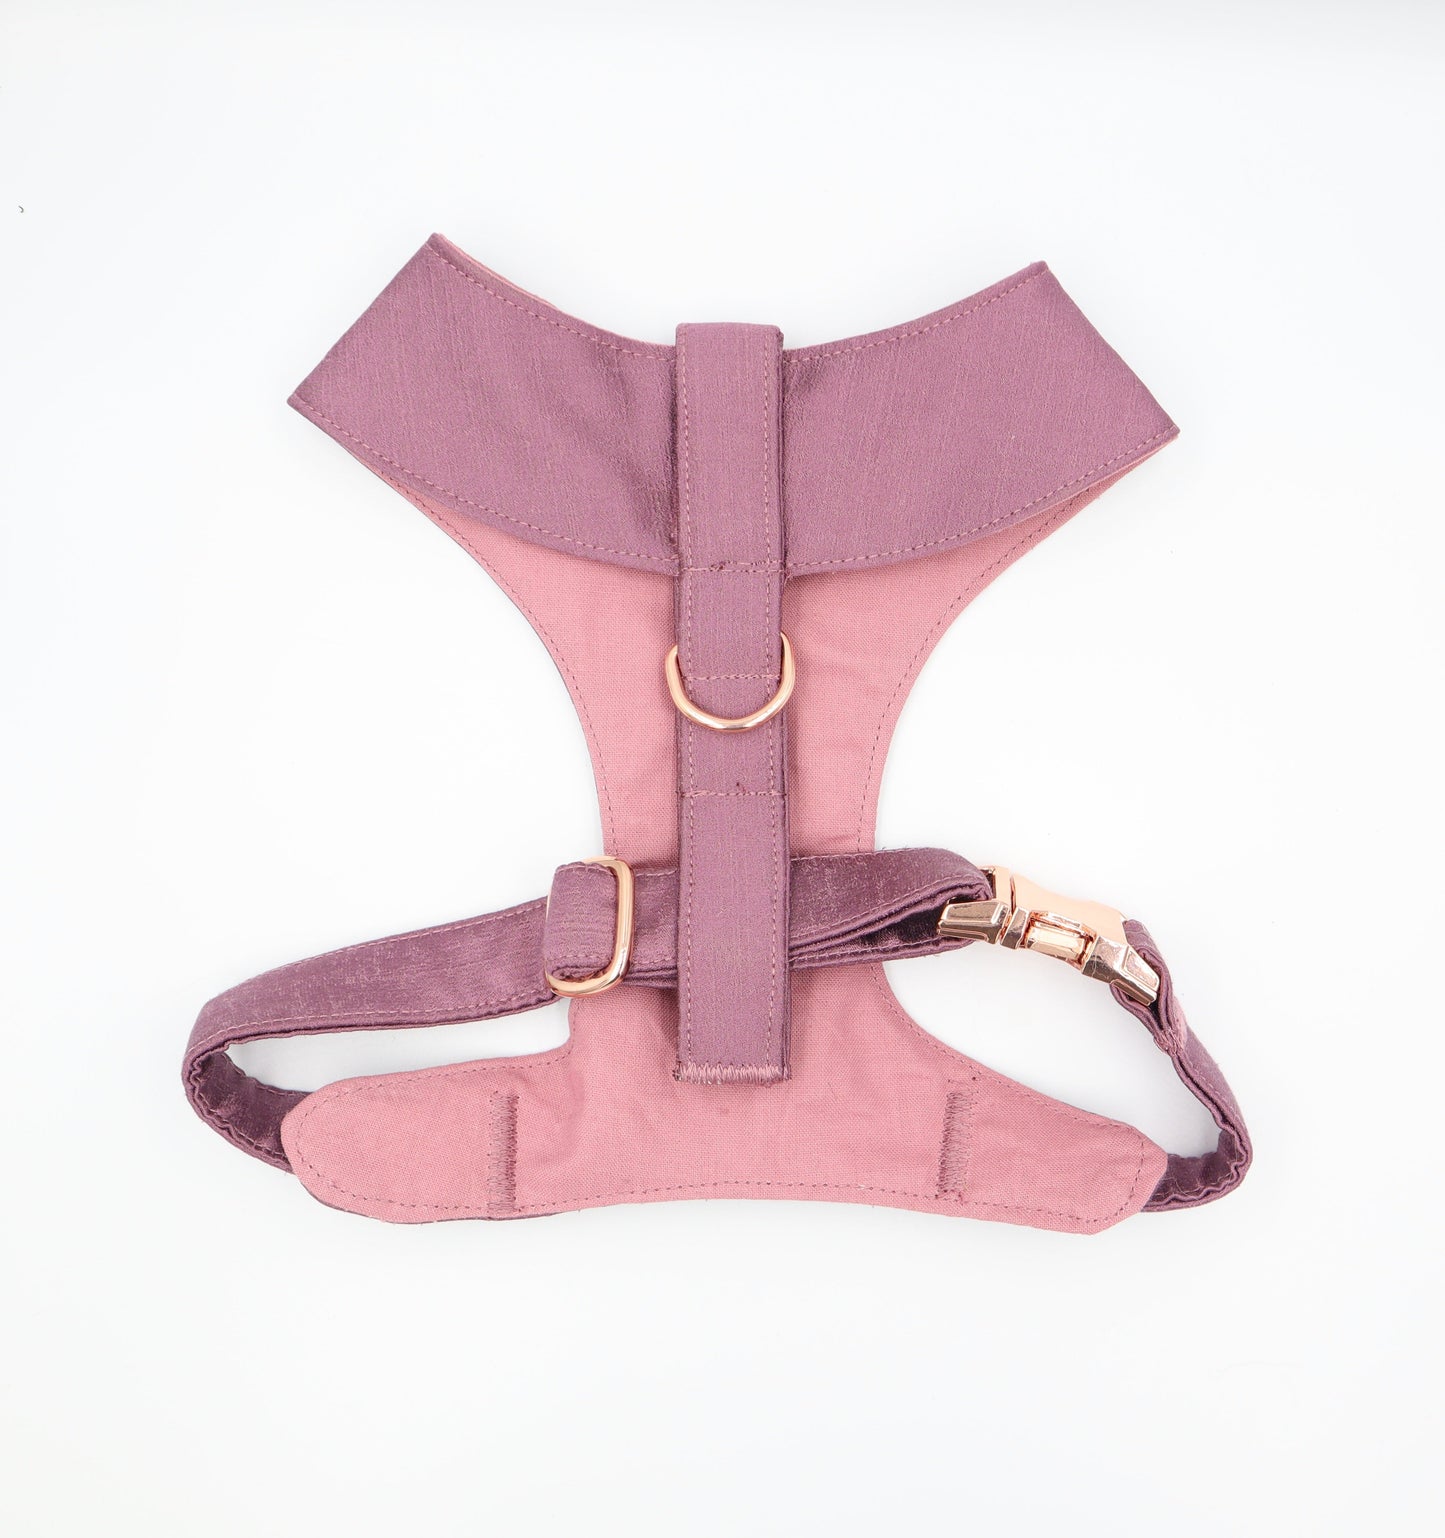 Tuxedo Wedding Dog Harness in Mauve Shot Silk Satin with Lilac Bow CHOICE of COLOURS